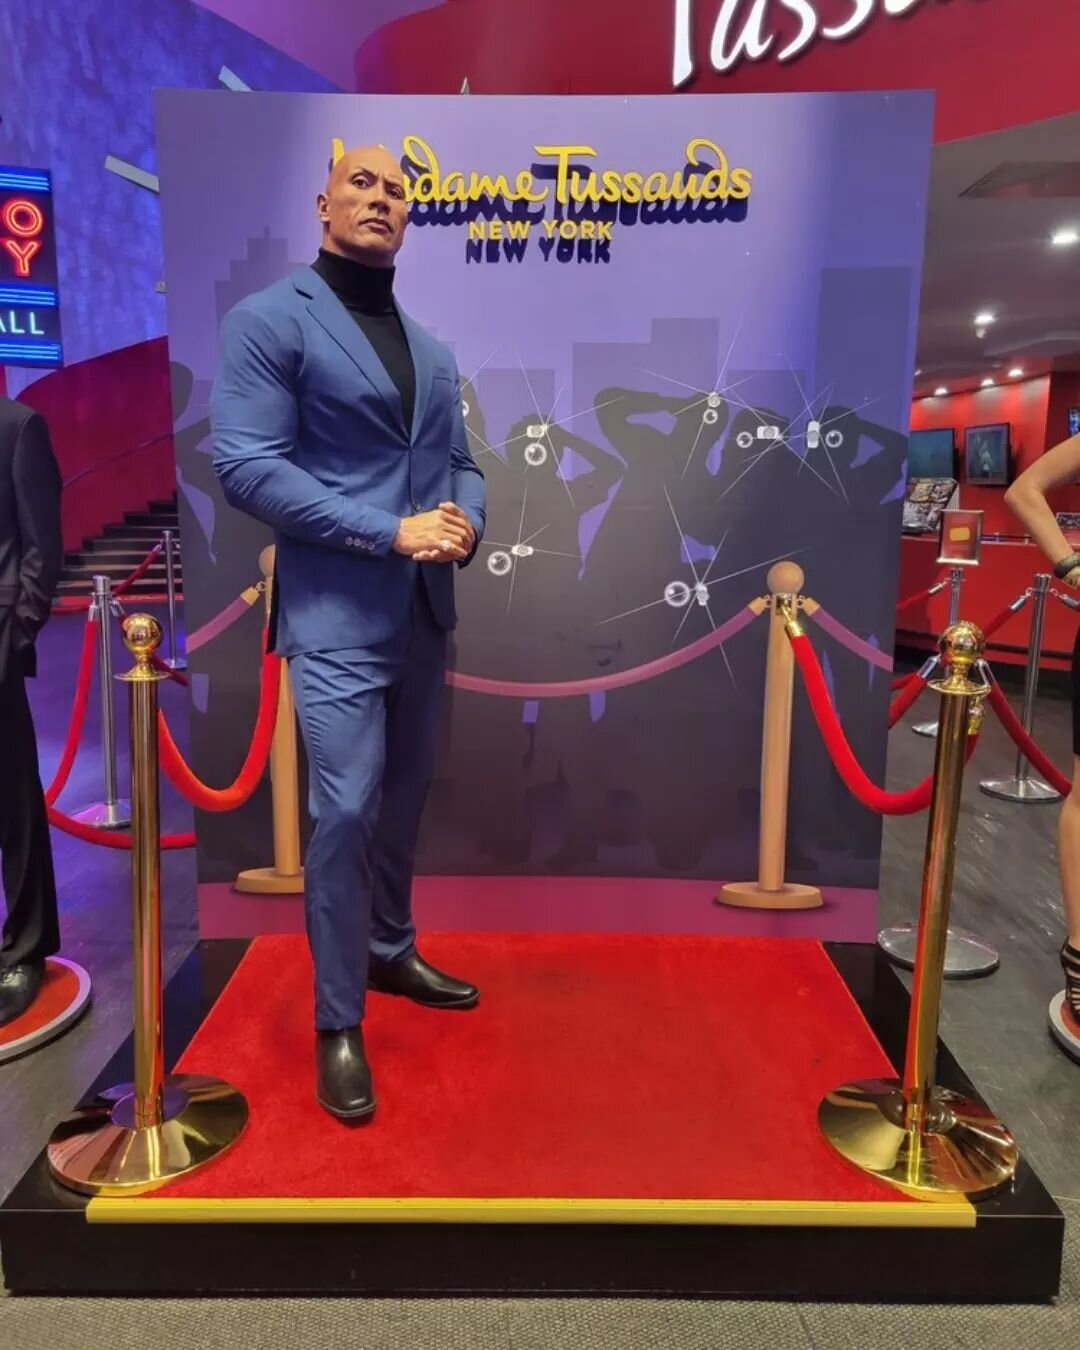 We love seeing the transformation of a design from the studio to set display. &lsquo;Before&rsquo; pictures may lend to this set looking tiny, but the &lsquo;after&rsquo; seen @madametussaudsusa clearly shows this set measuring up to Dwayne Johnson&r